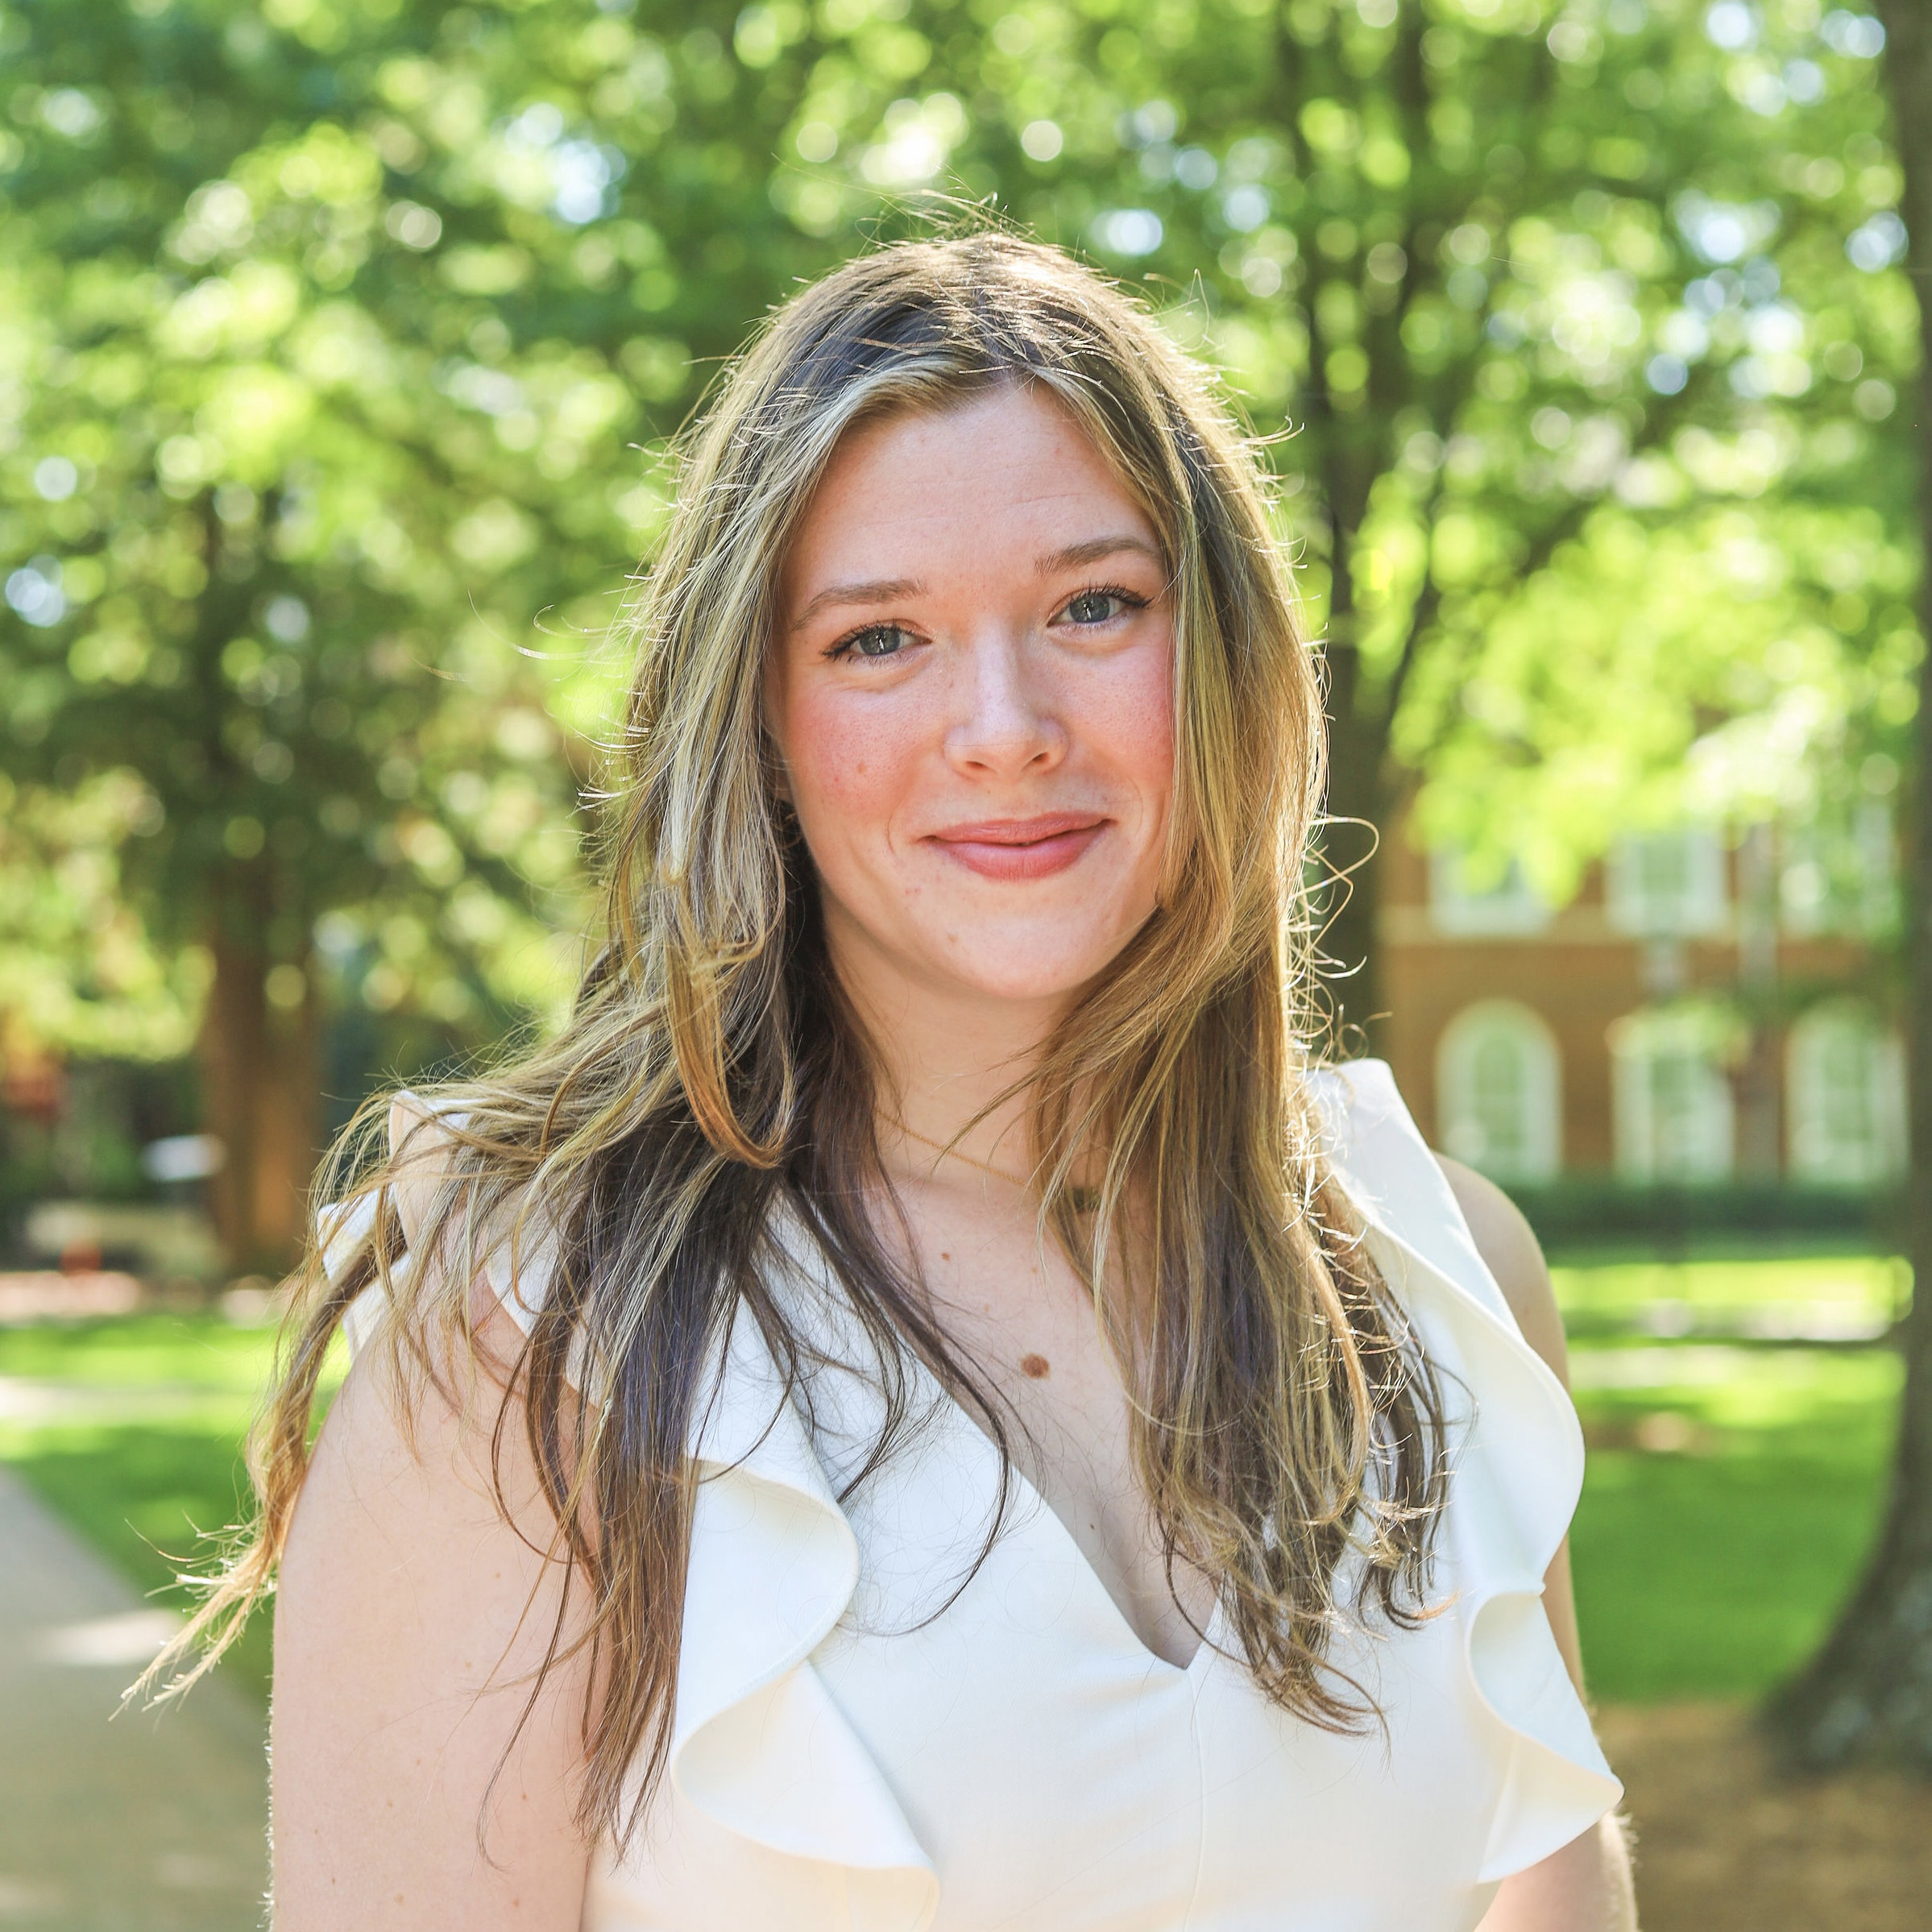 Elon's excellent degree outcomes helped Justine Hurst, who is standing outside on Elon's campus, secure a position as a MedFellow.